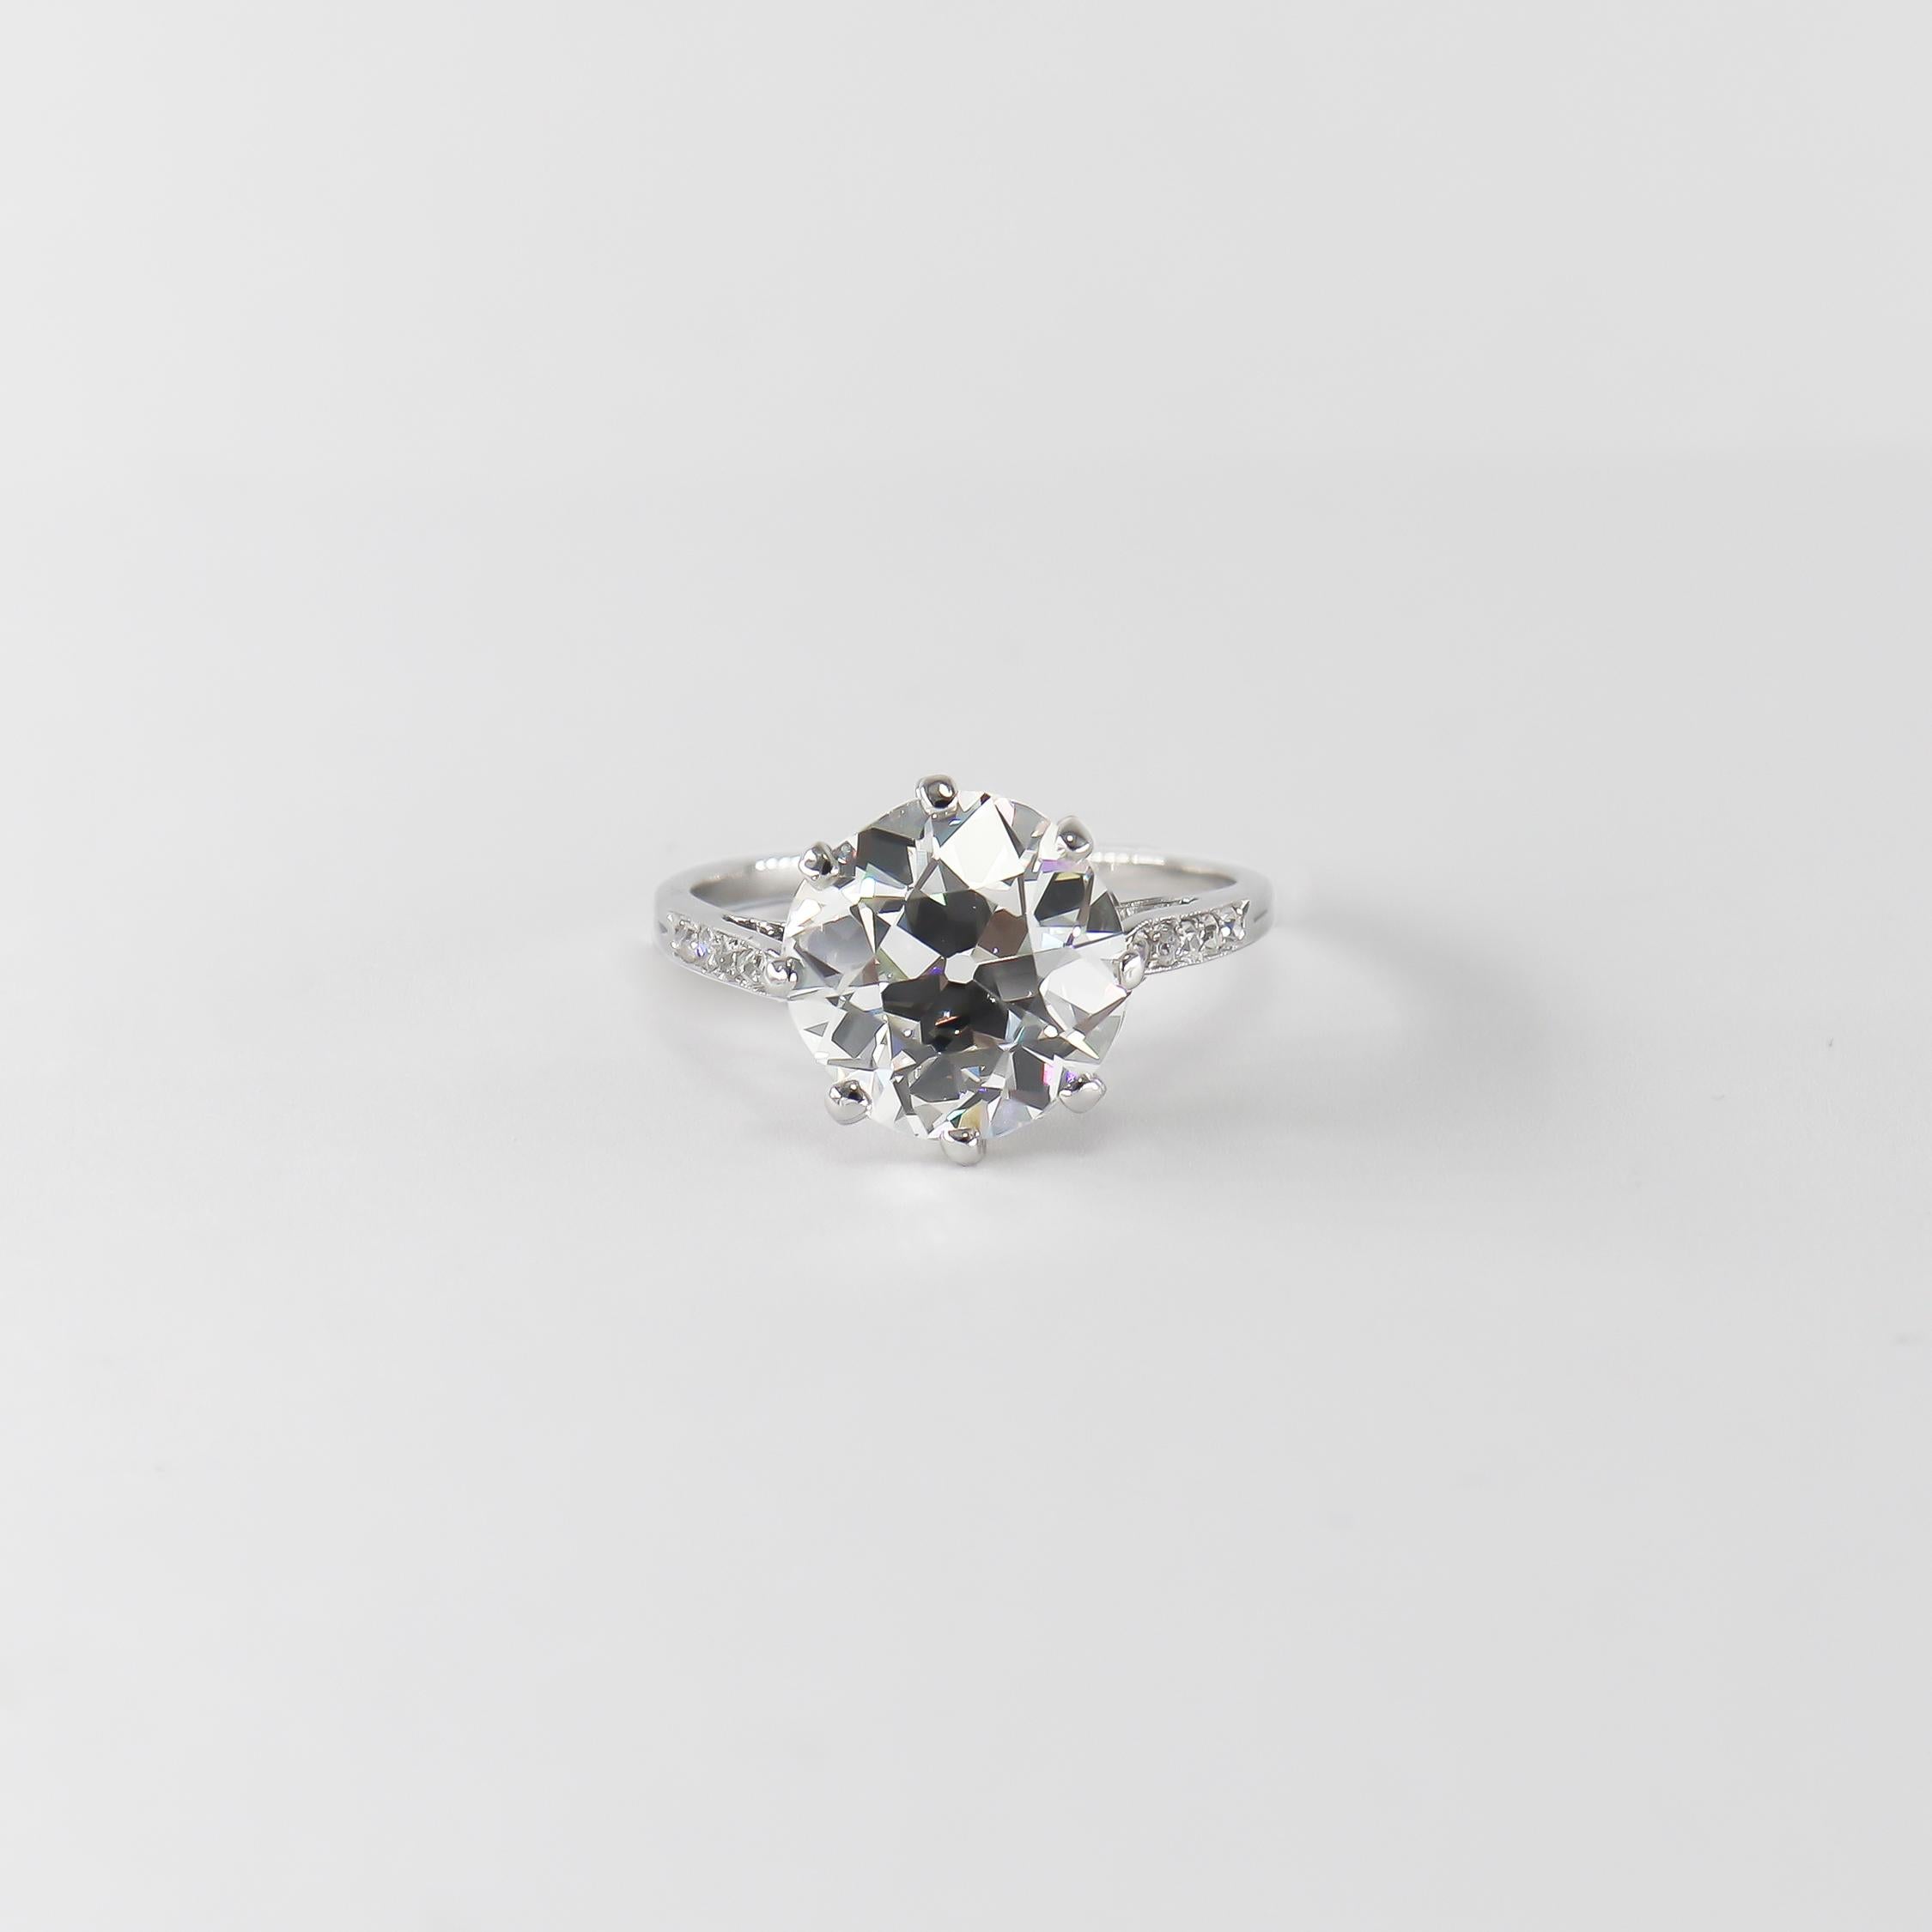 This incredible new acquisition from the house of J. Birnbach features a 4.55 carat Old Mine cut diamond of I color and VS1 clarity as described by GIA grading report #6227275455. Set in a vintage, platinum ring mounting with bright-cut pavé, this